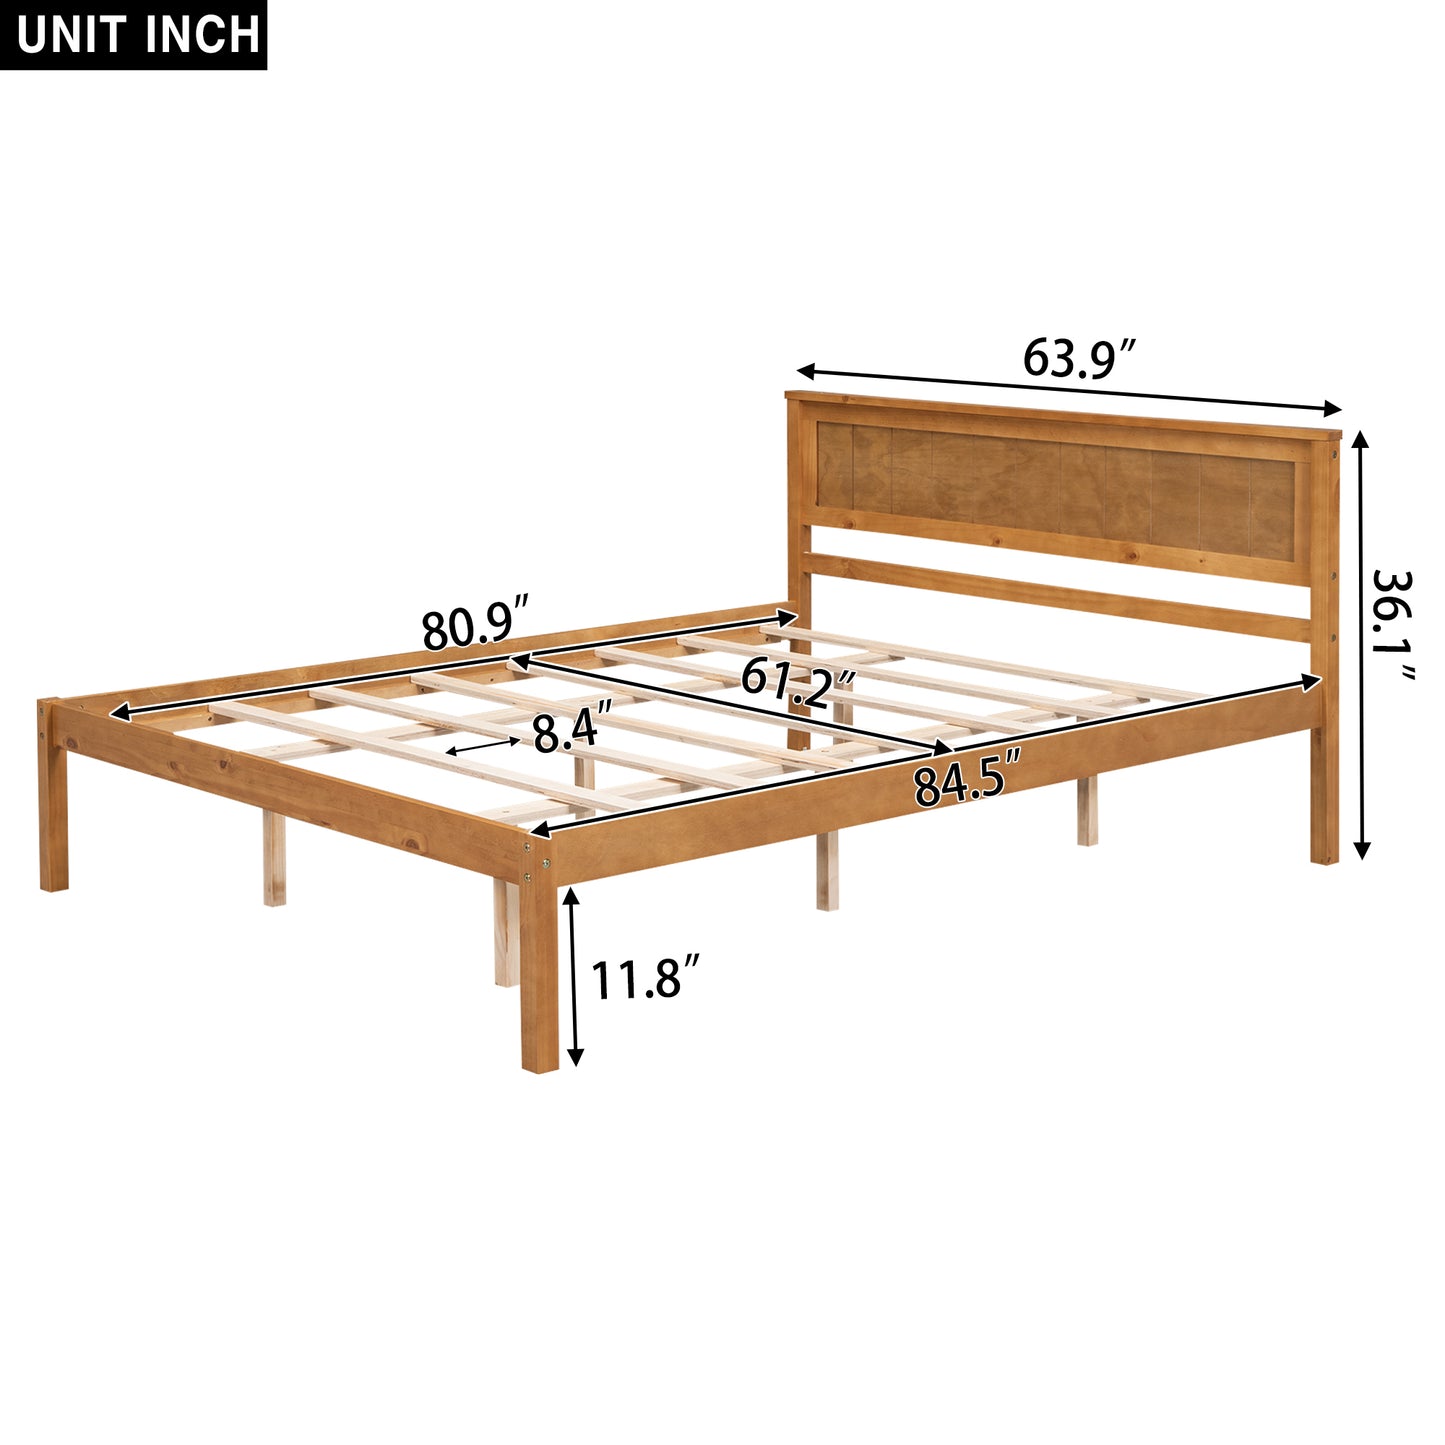 Platform Bed Frame with Headboard, Wood Slat Support, No Box Spring Needed, Queen, Oak